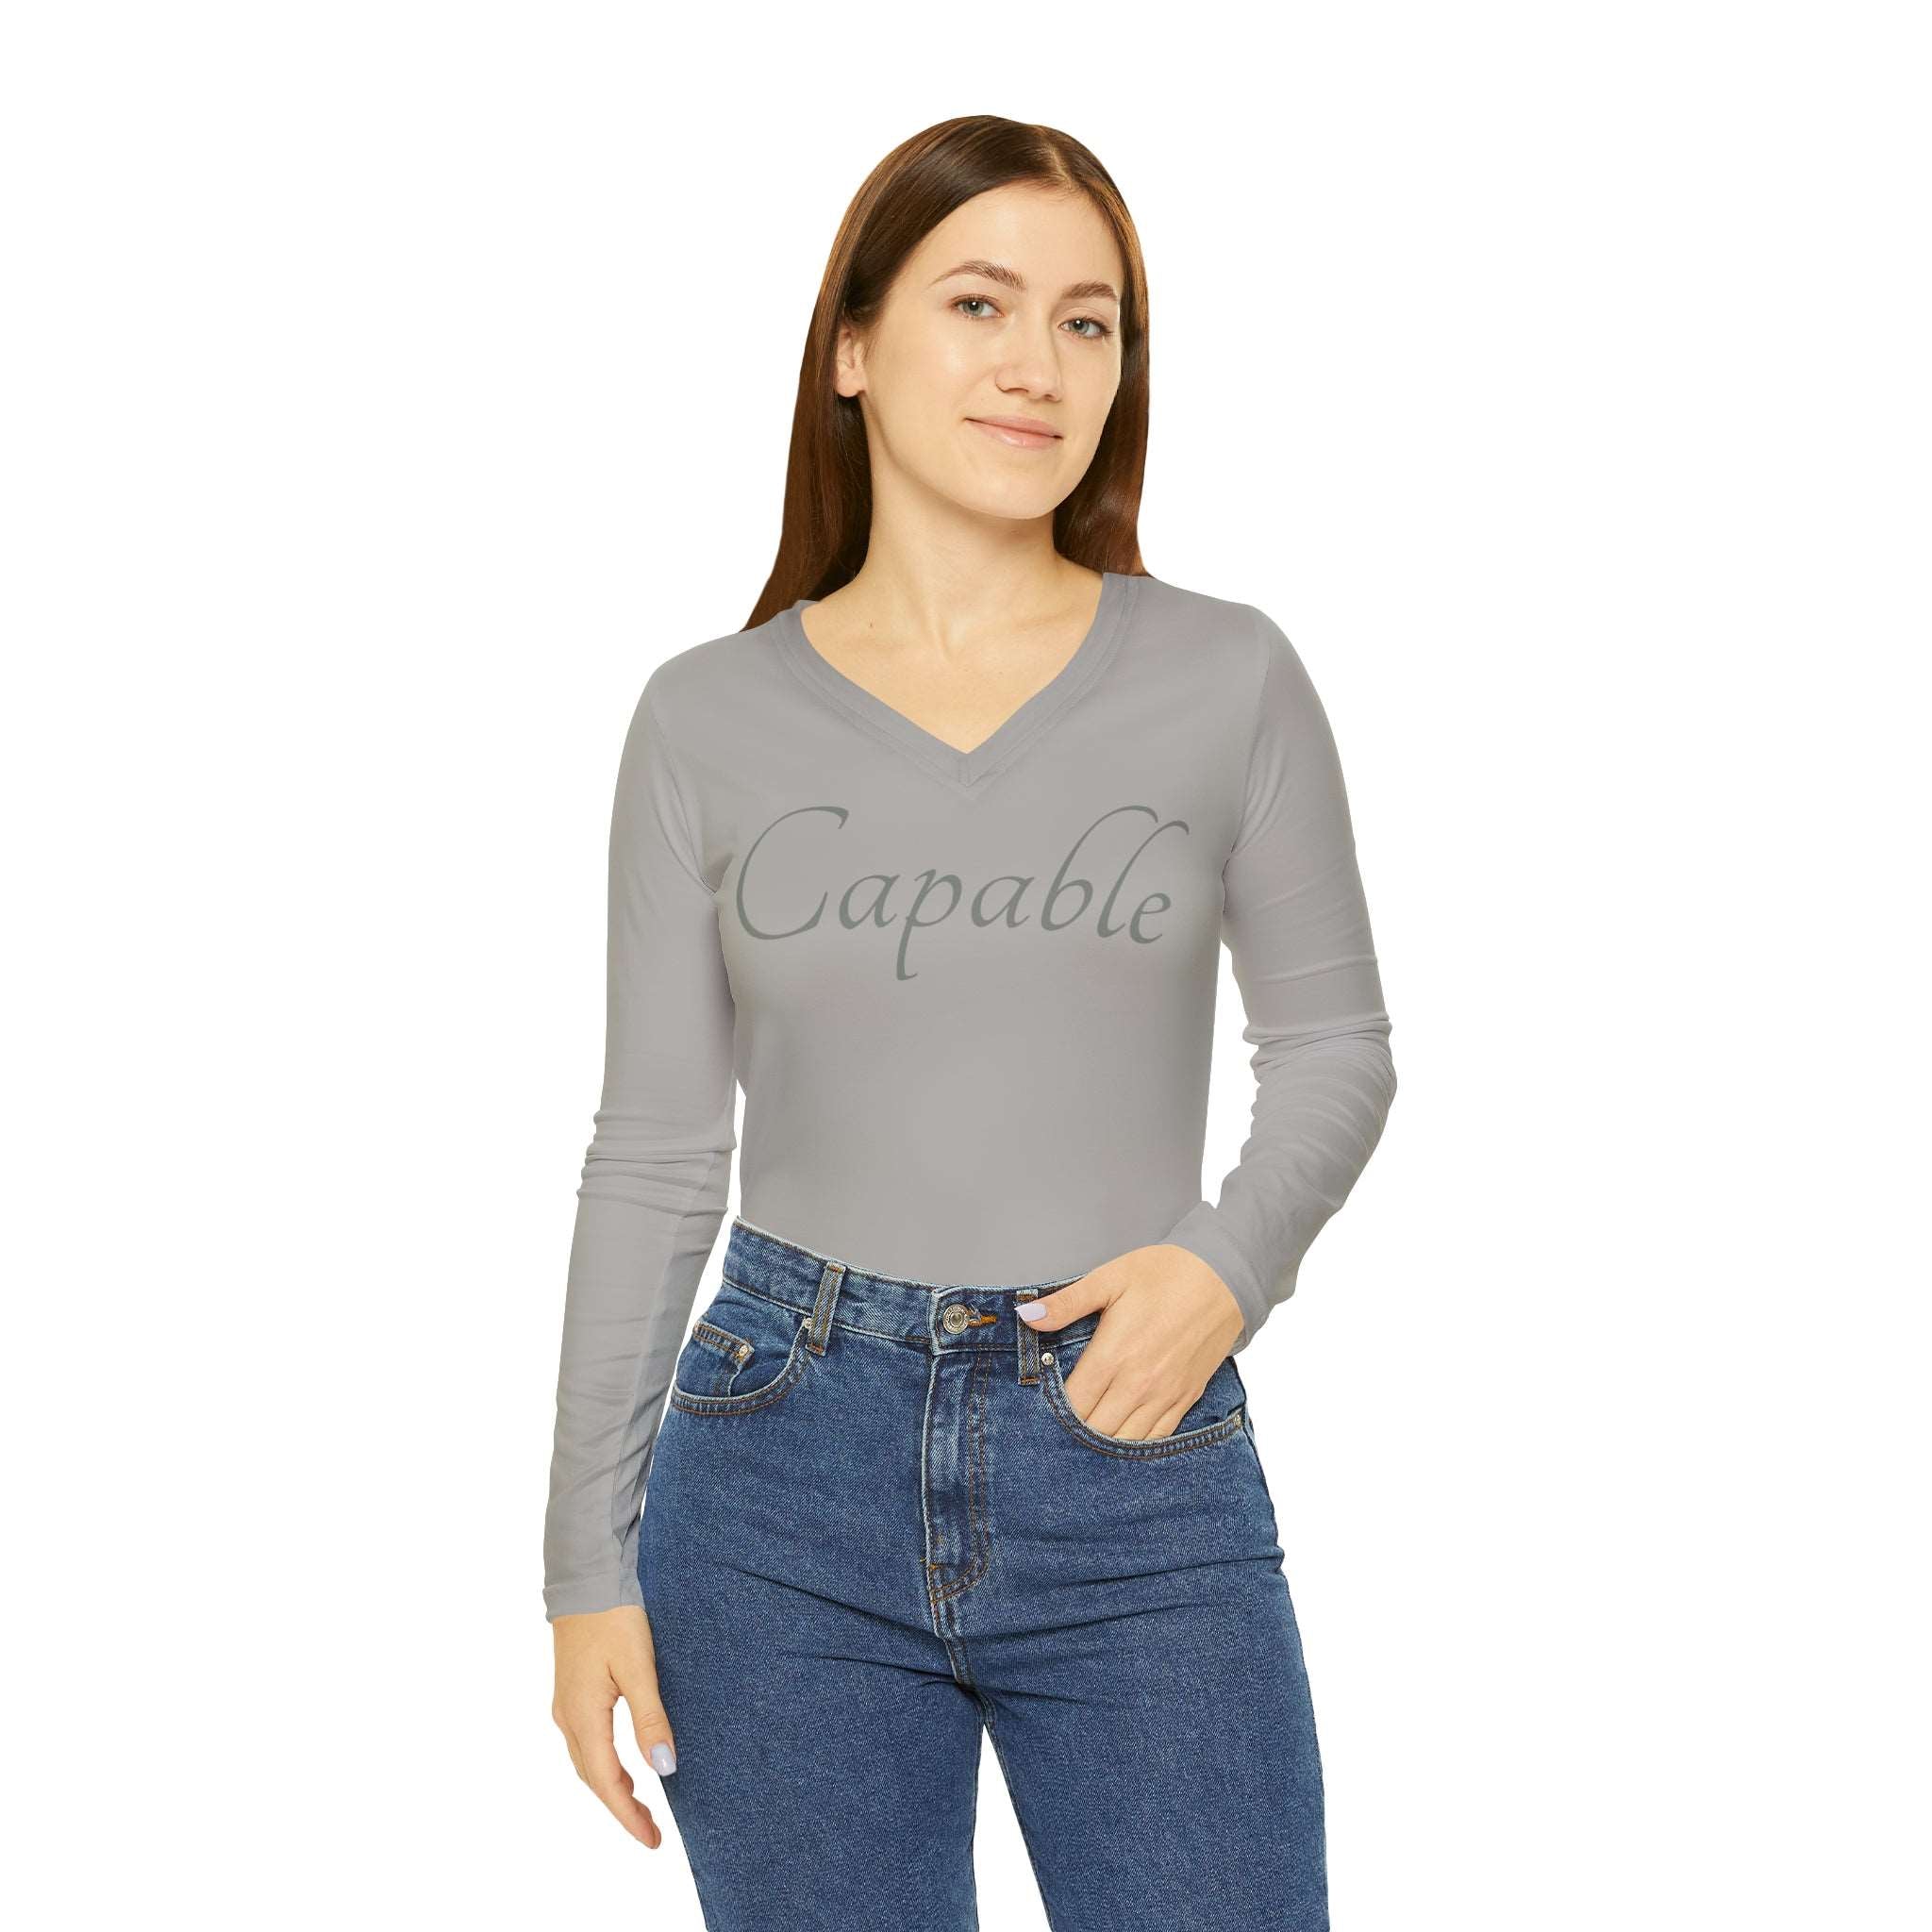 Capable Long Sleeve V-neck: Elevate Your Style Activewear Fashion with a Cause Long Sleeve V-neck Mental Health Initiative Pledge Donation Polyester Spandex Blend Premium Quality Stylish Apparel All Over Prints 14969091835383151872_2048_587fbce3-0127-4649-9732-6a4d29c2bab7 Printify